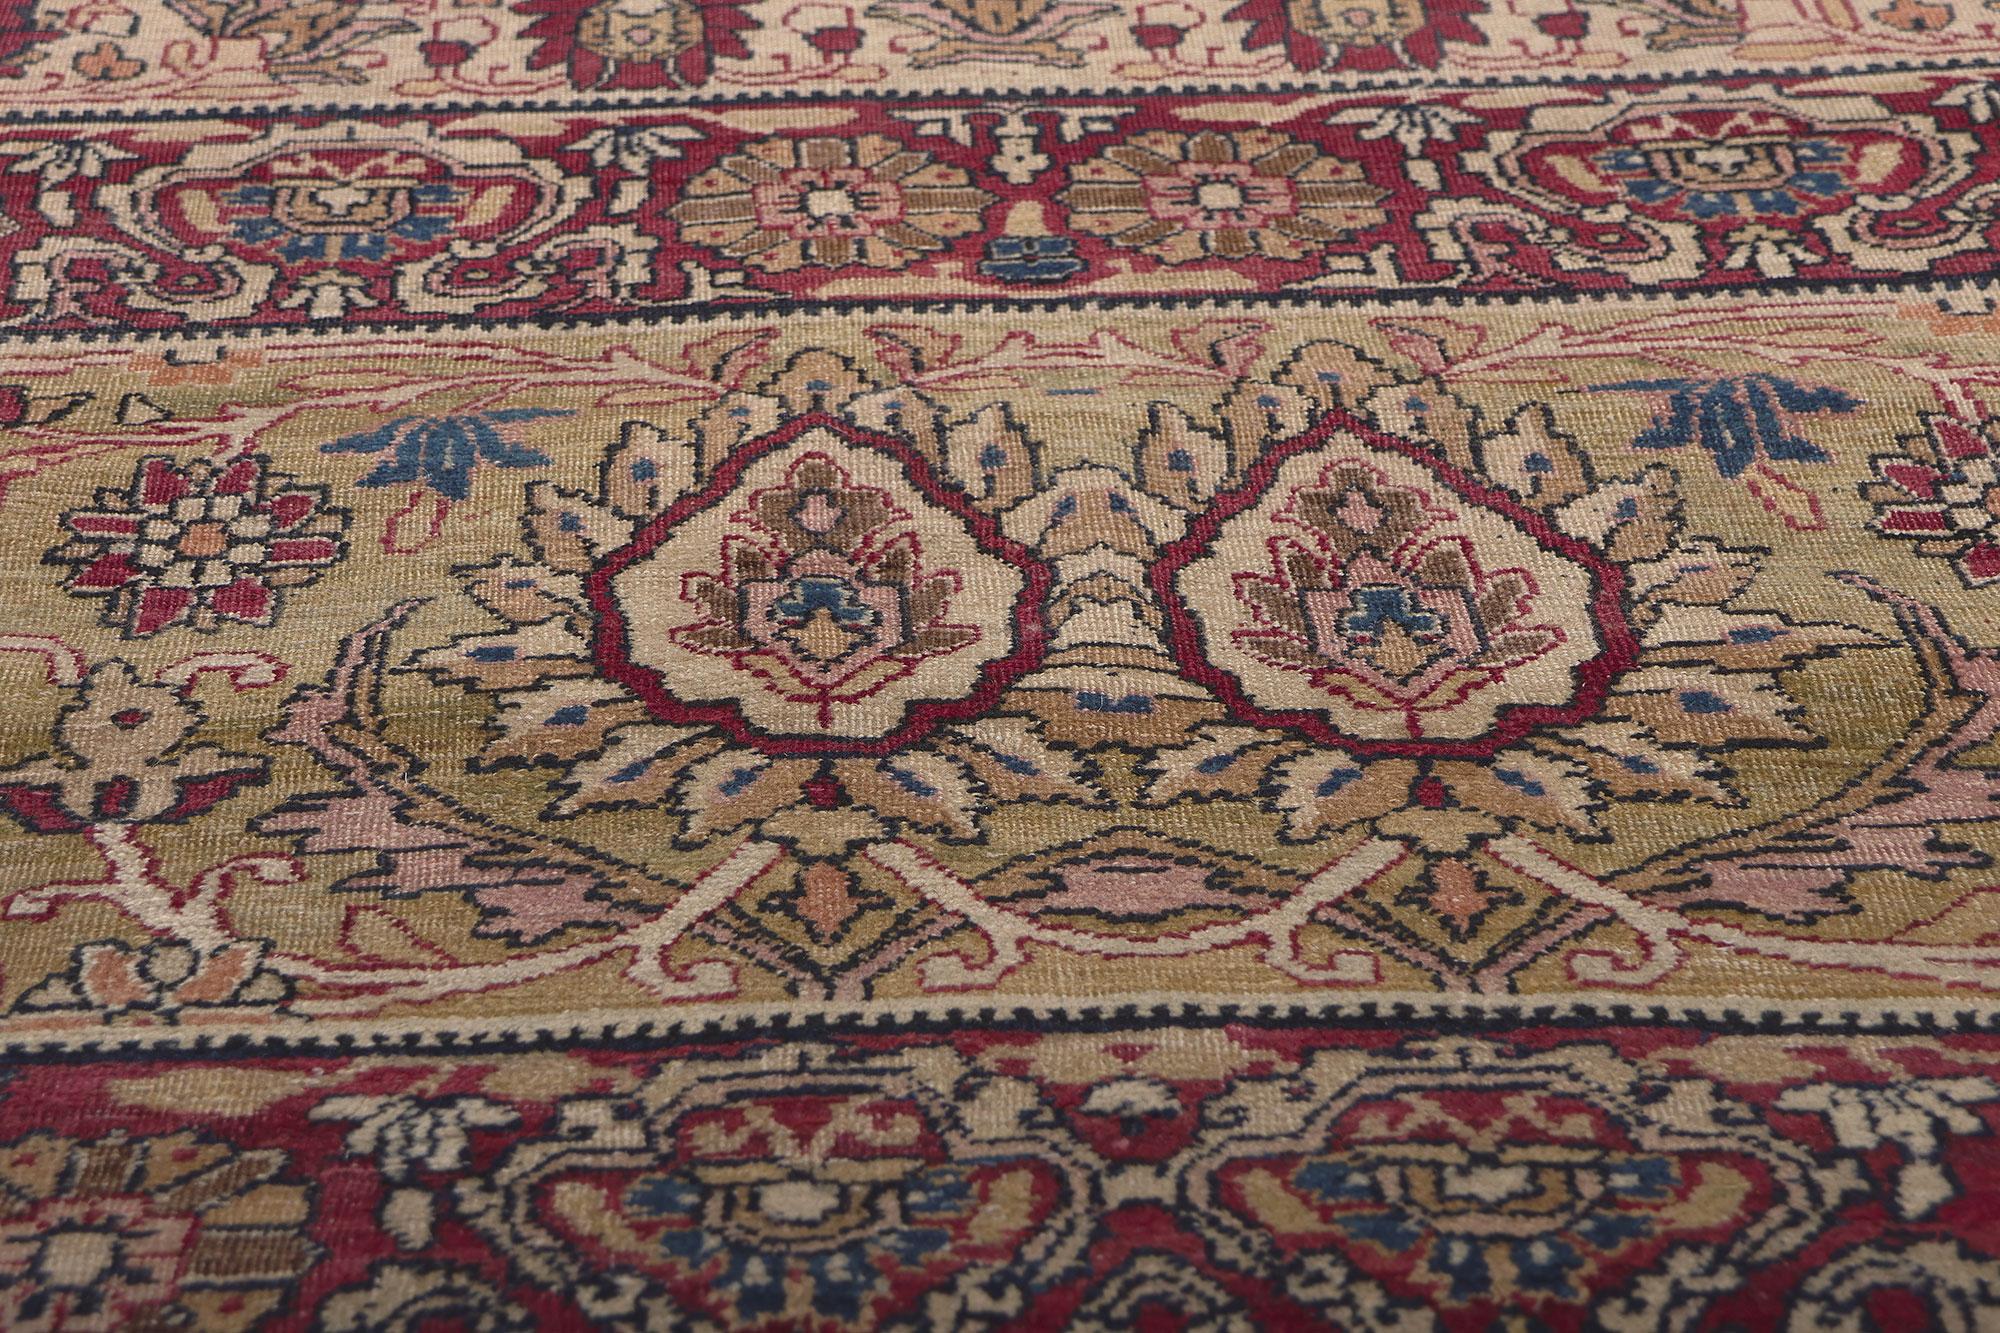 1880s Oversized Antique Persian Kermanshah Rug In Good Condition For Sale In Dallas, TX